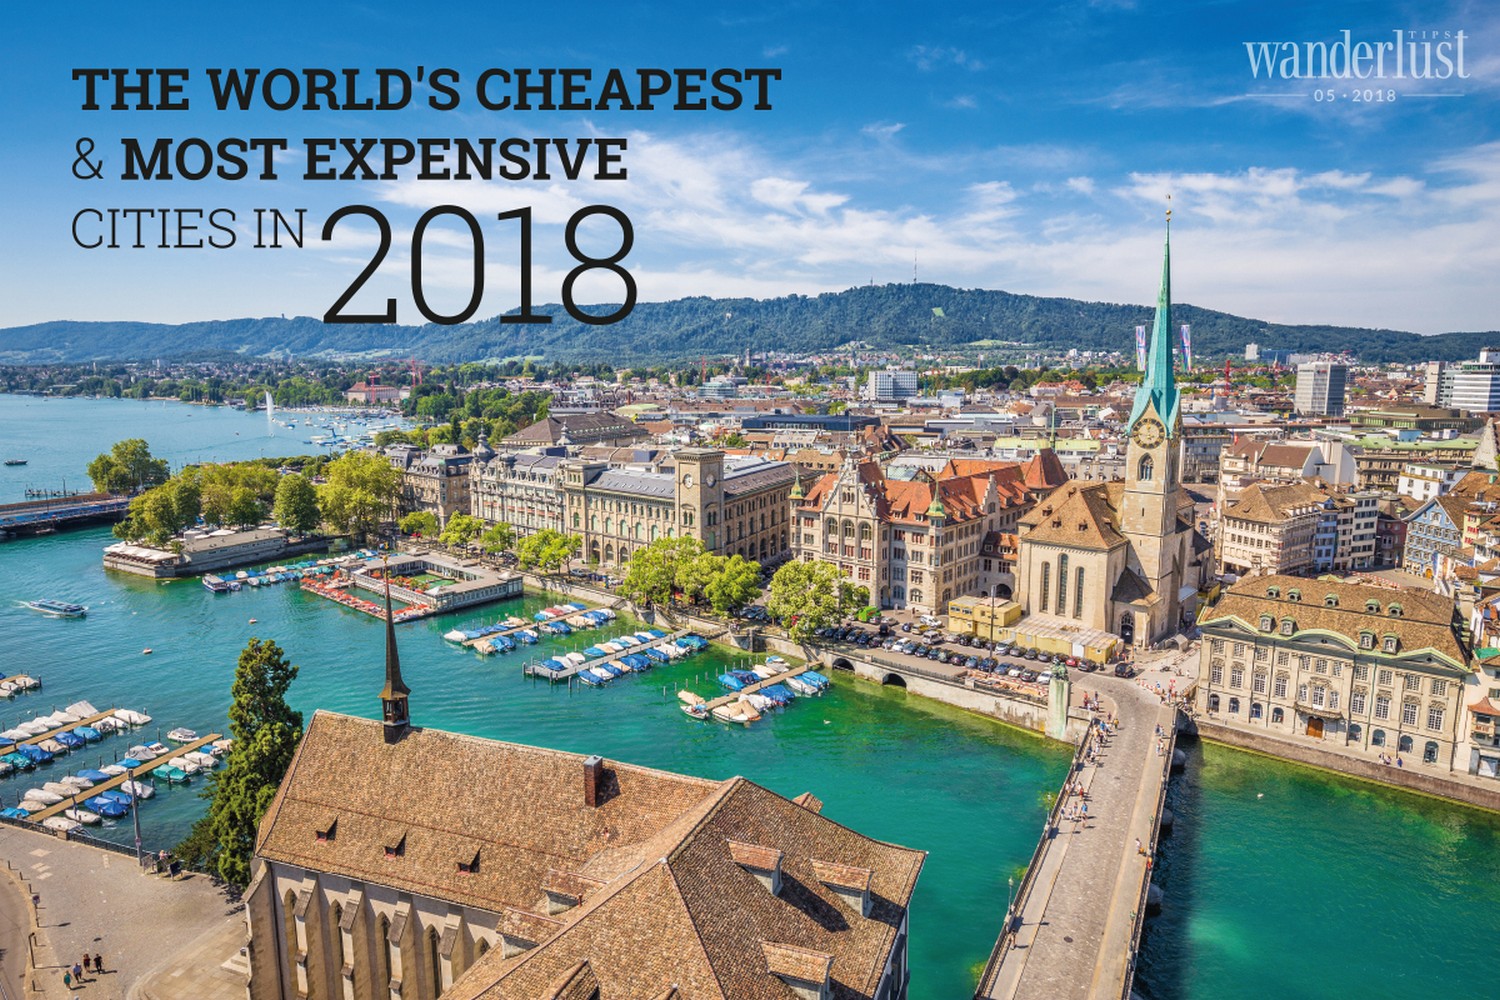 Wanderlust Tips Magazine | The world’s cheapest & most expensive cities in 2018